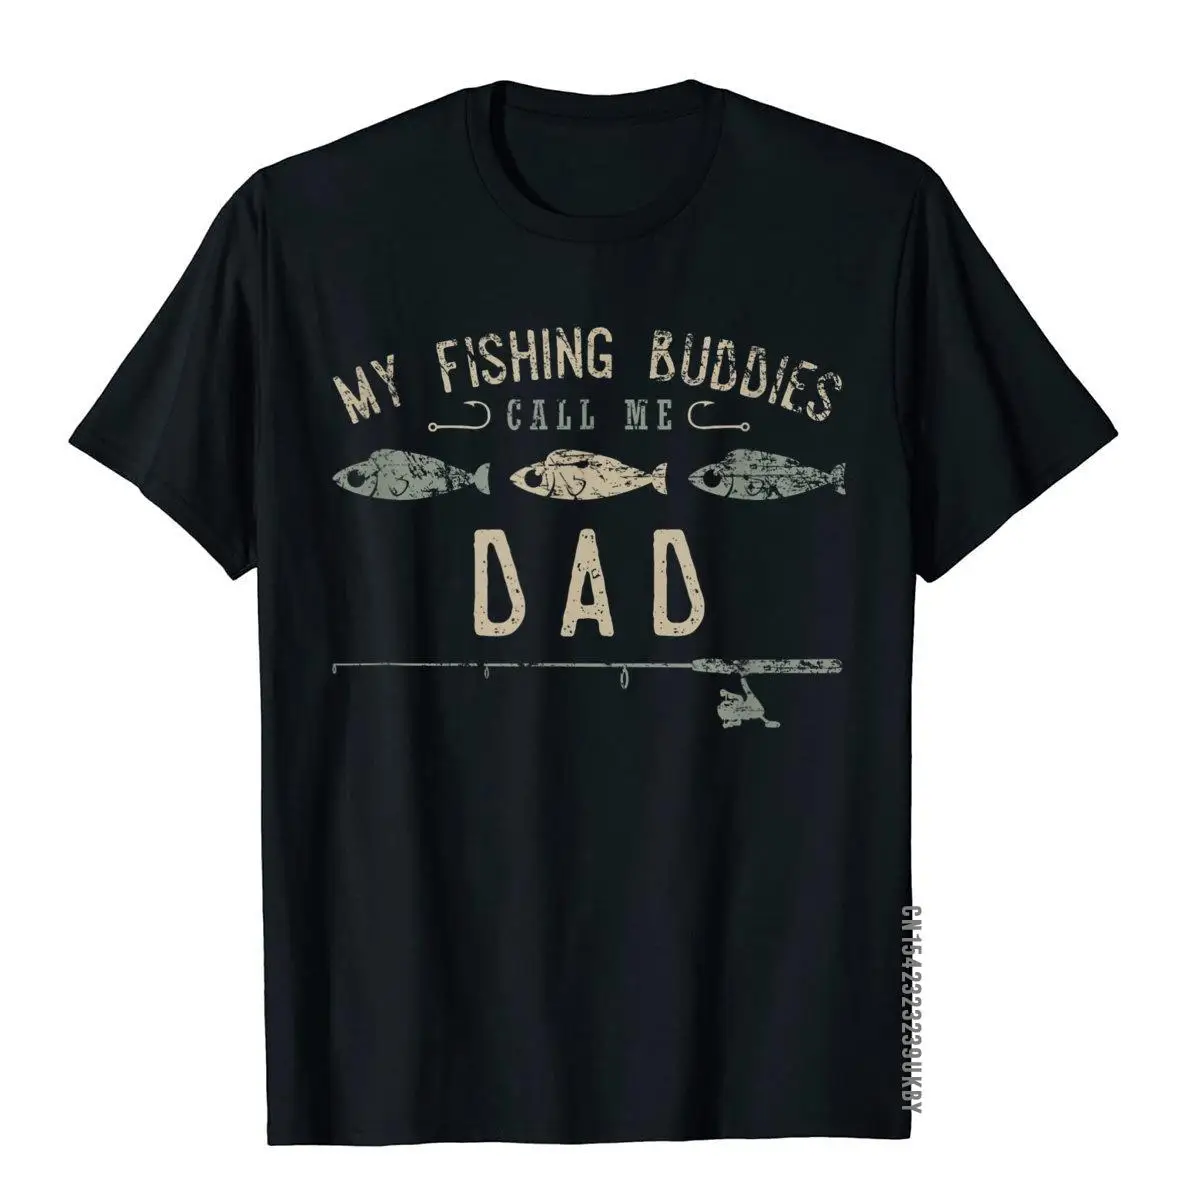 

My Fishin Buddies Call Me Dad Shirt Cute Father's Day Gift T Shirts Normal Designer Cotton Tops Tees Casual For Men